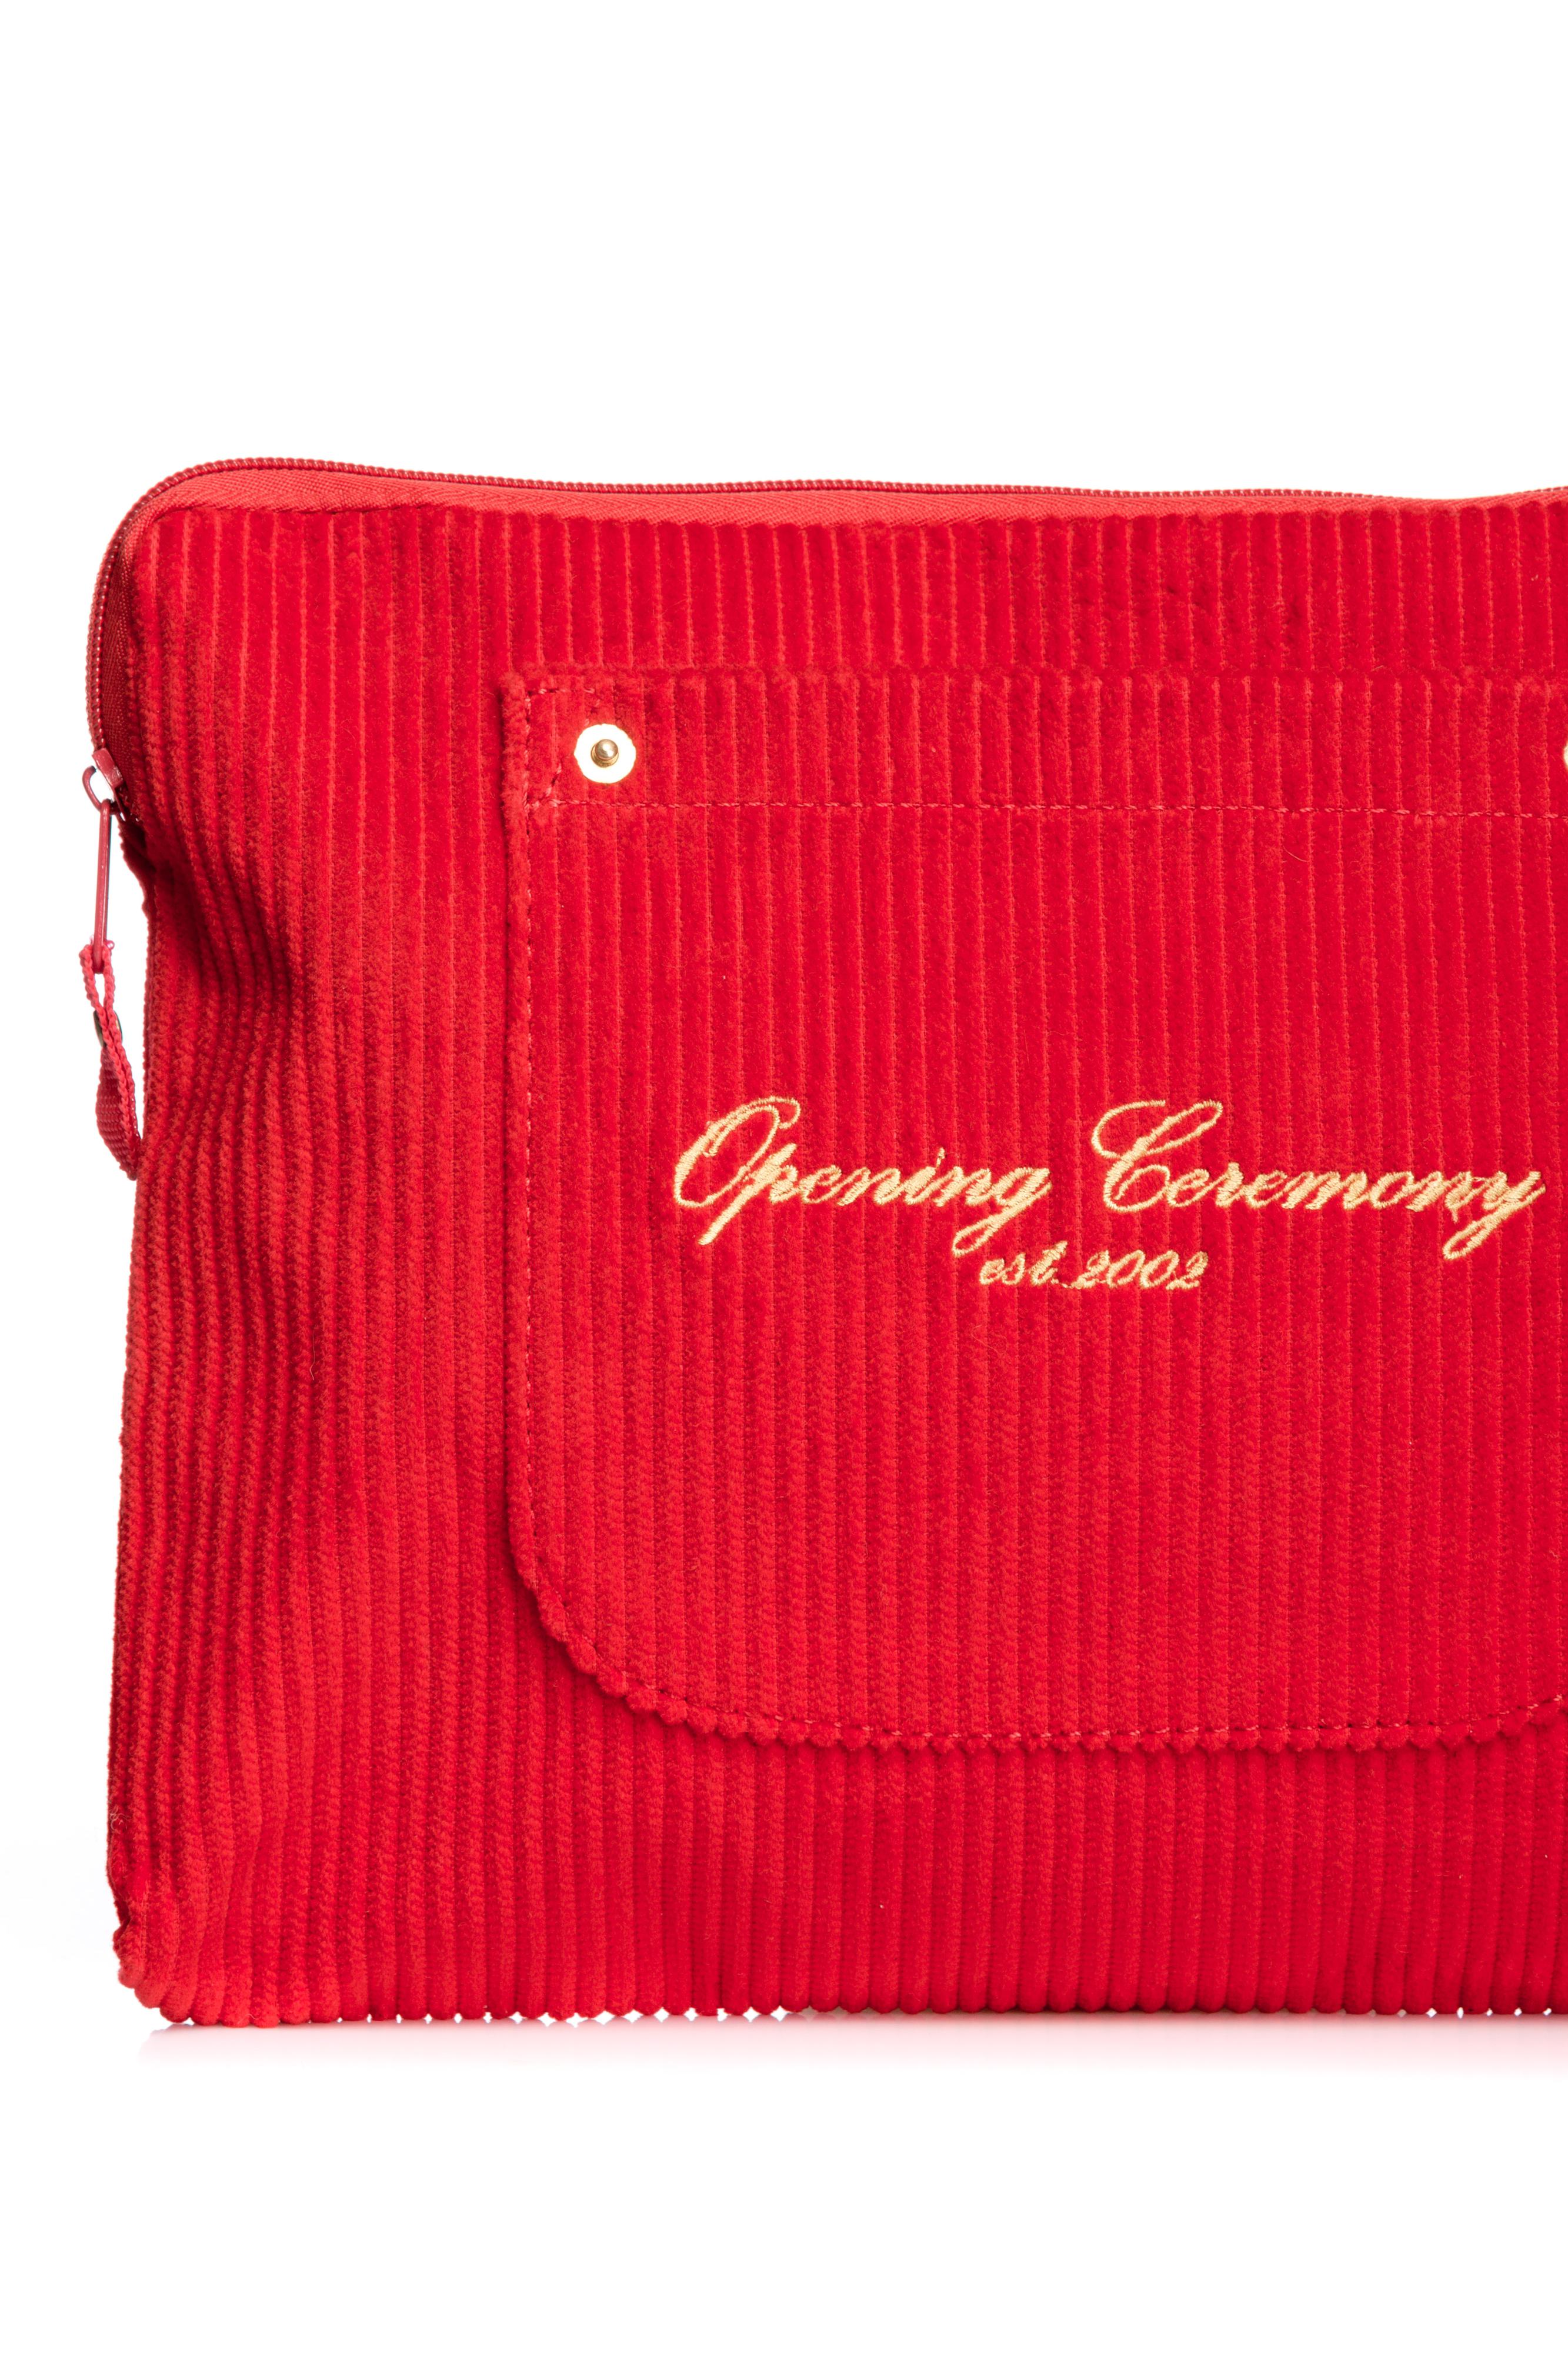 Geanta pouch Corduroy Opening Ceremony